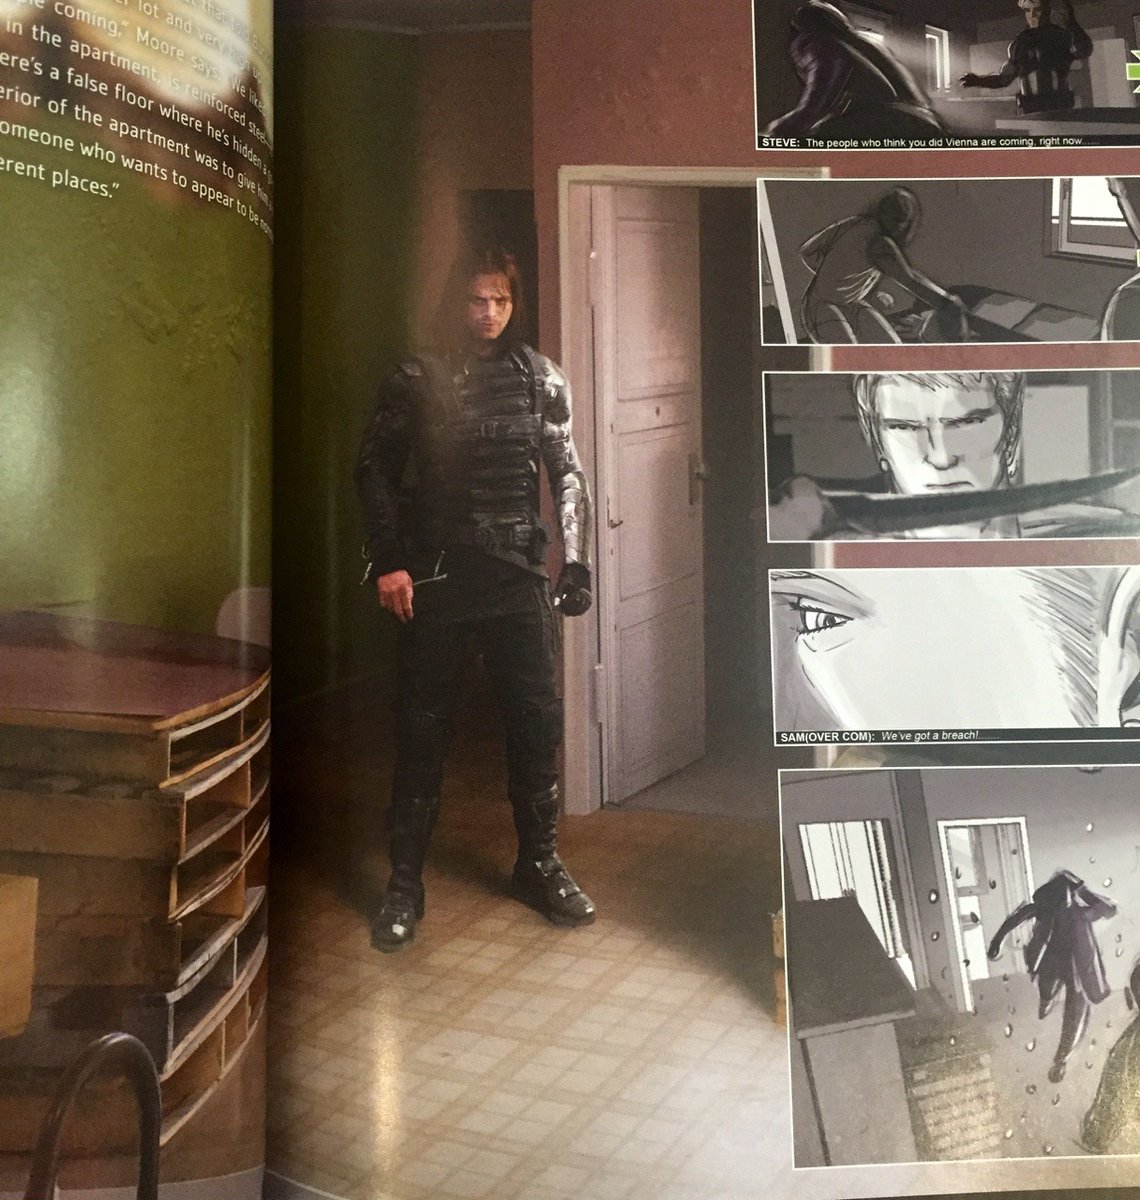 Sketch you would be able to find on "The Art of Captain America Civil War" about the storytelling of the action sequence